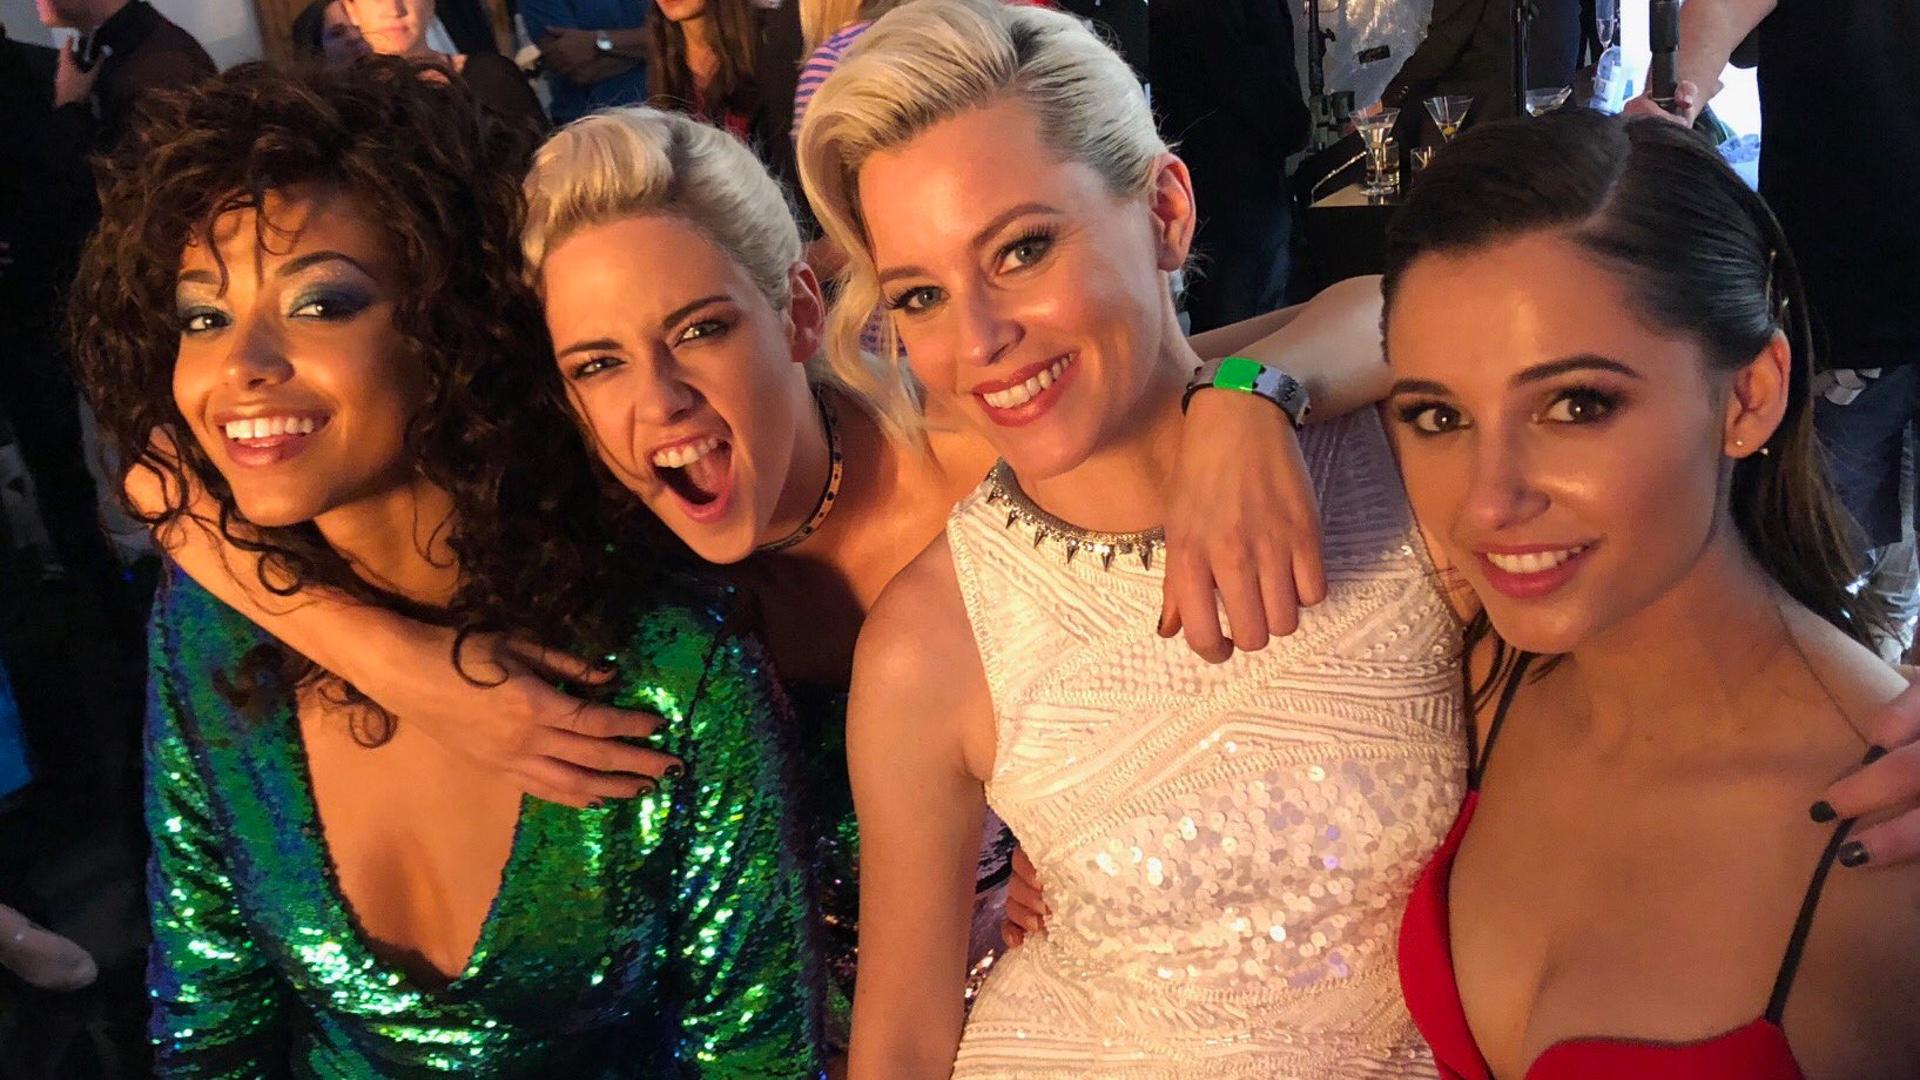 First Full 'Charlie's Angels' Reboot Released. The Nerd Stash